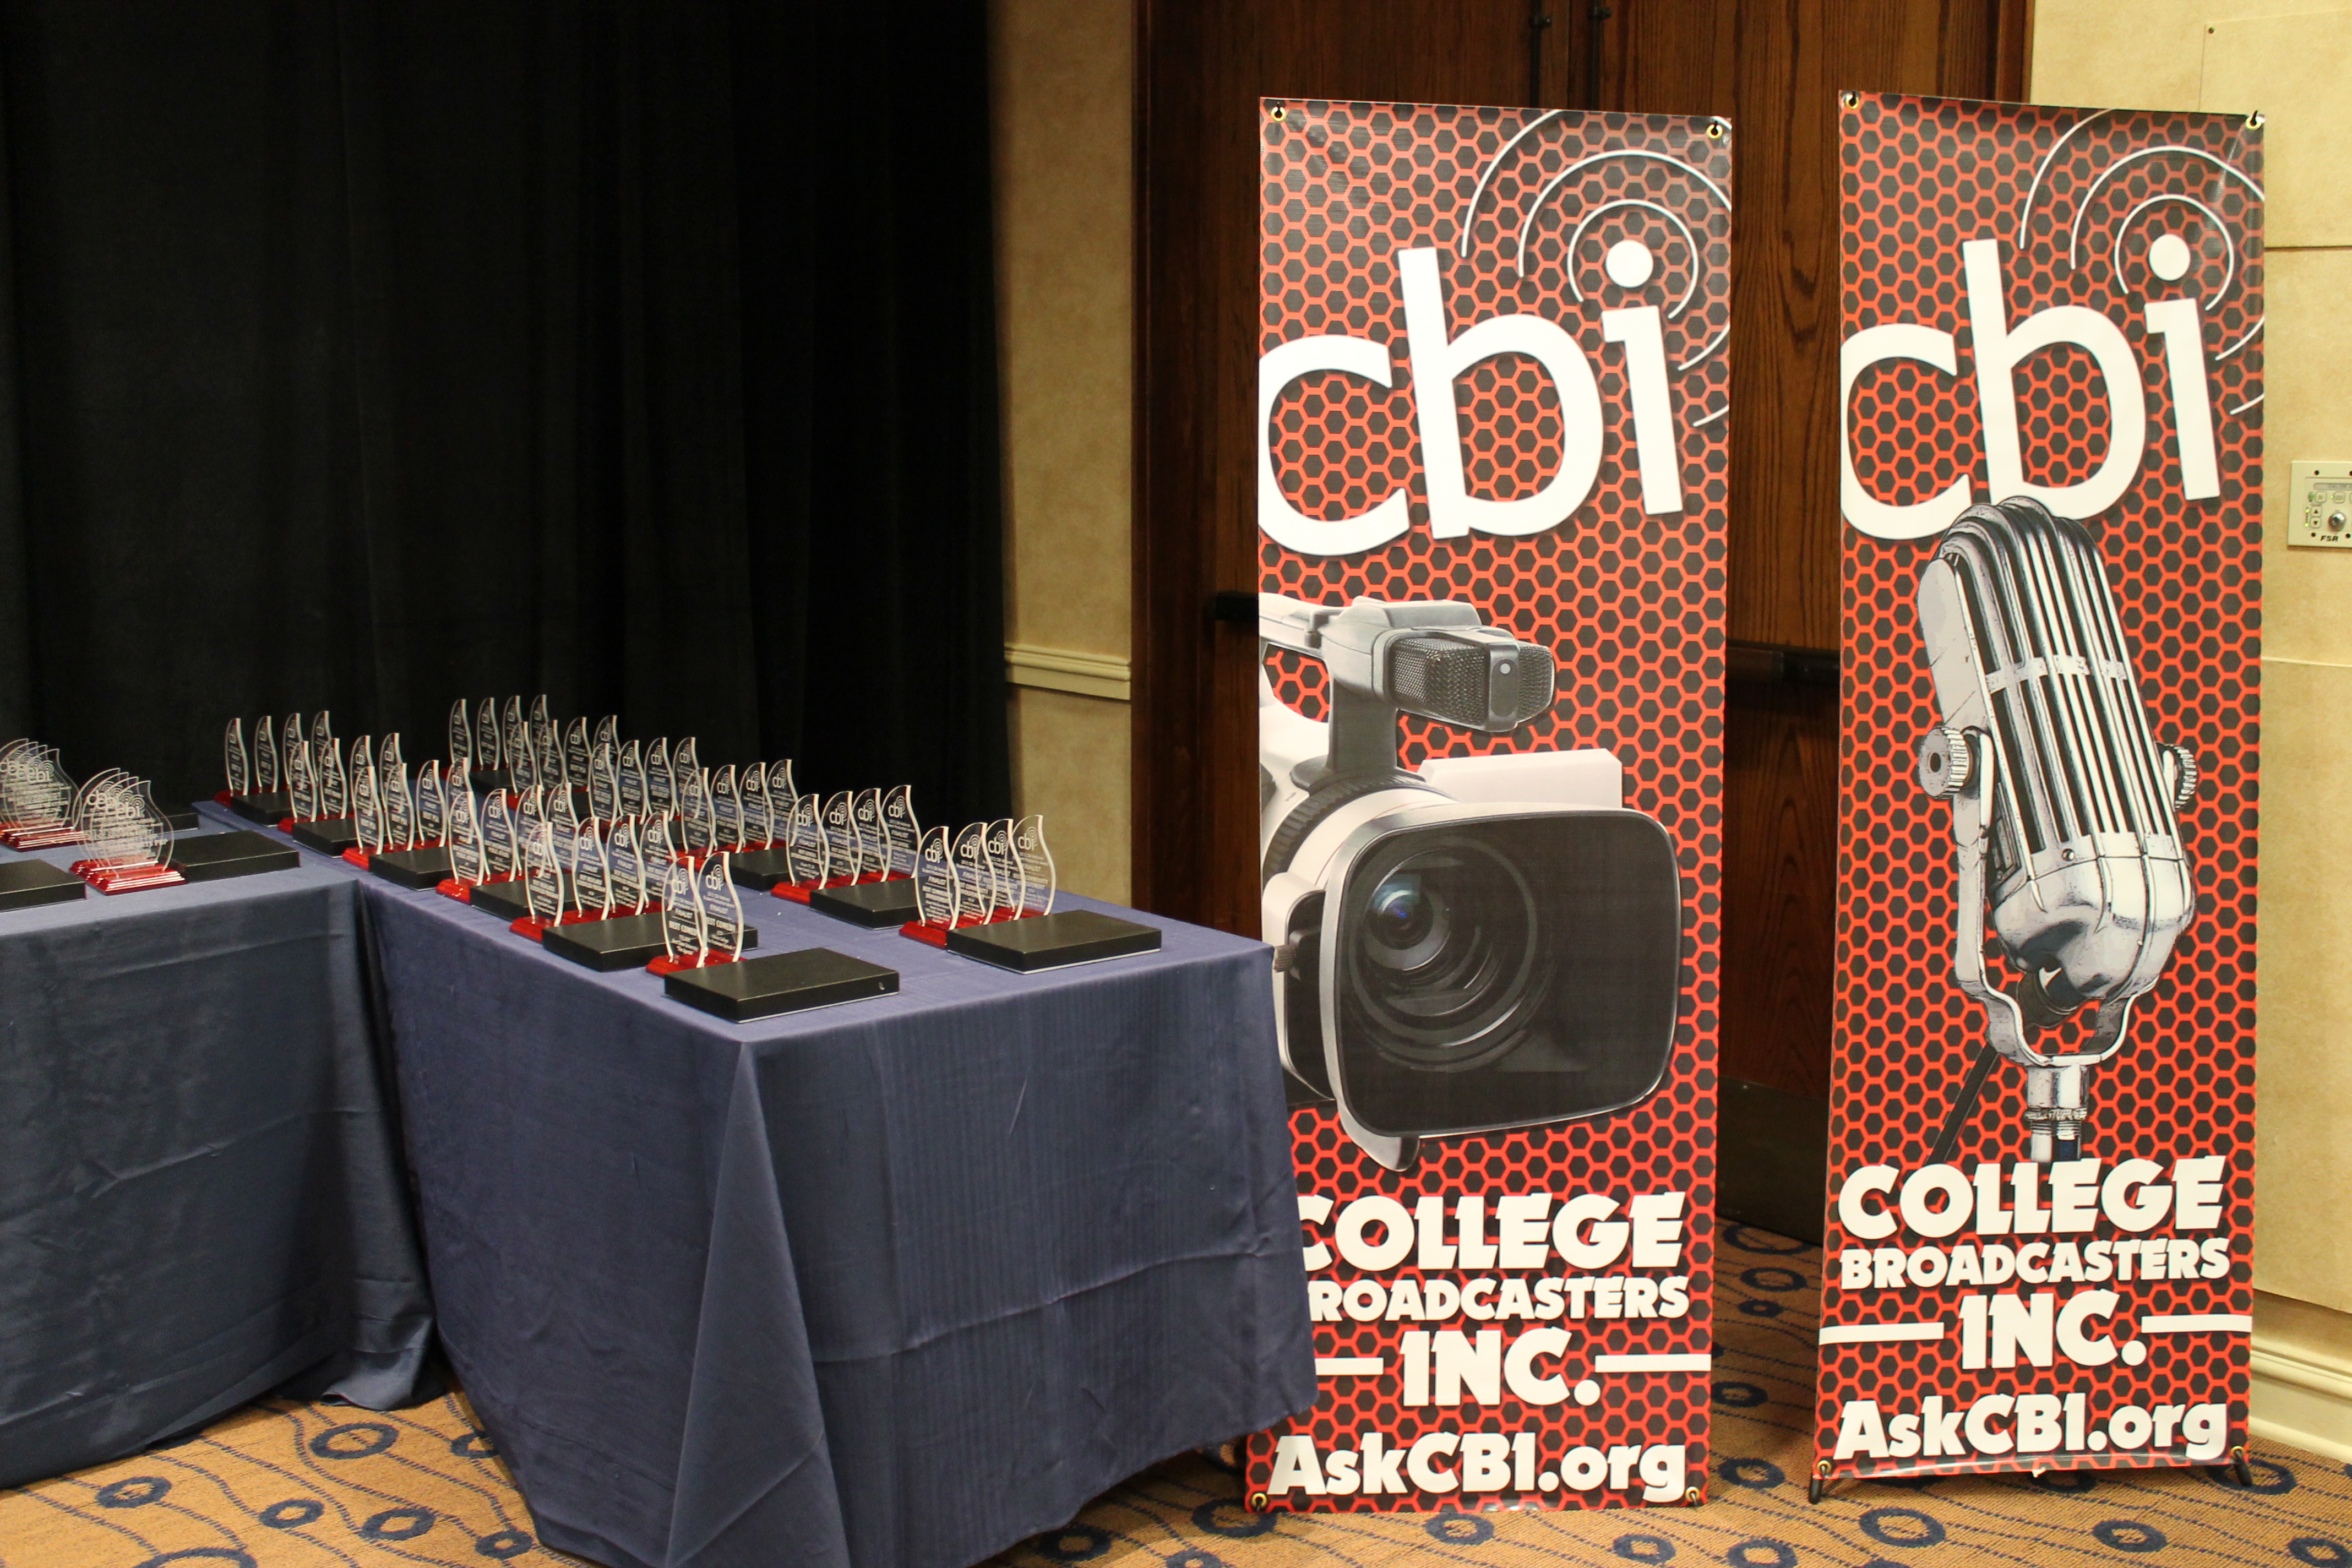 College Broadcasters Inc. Announces Student Production Awards Winners